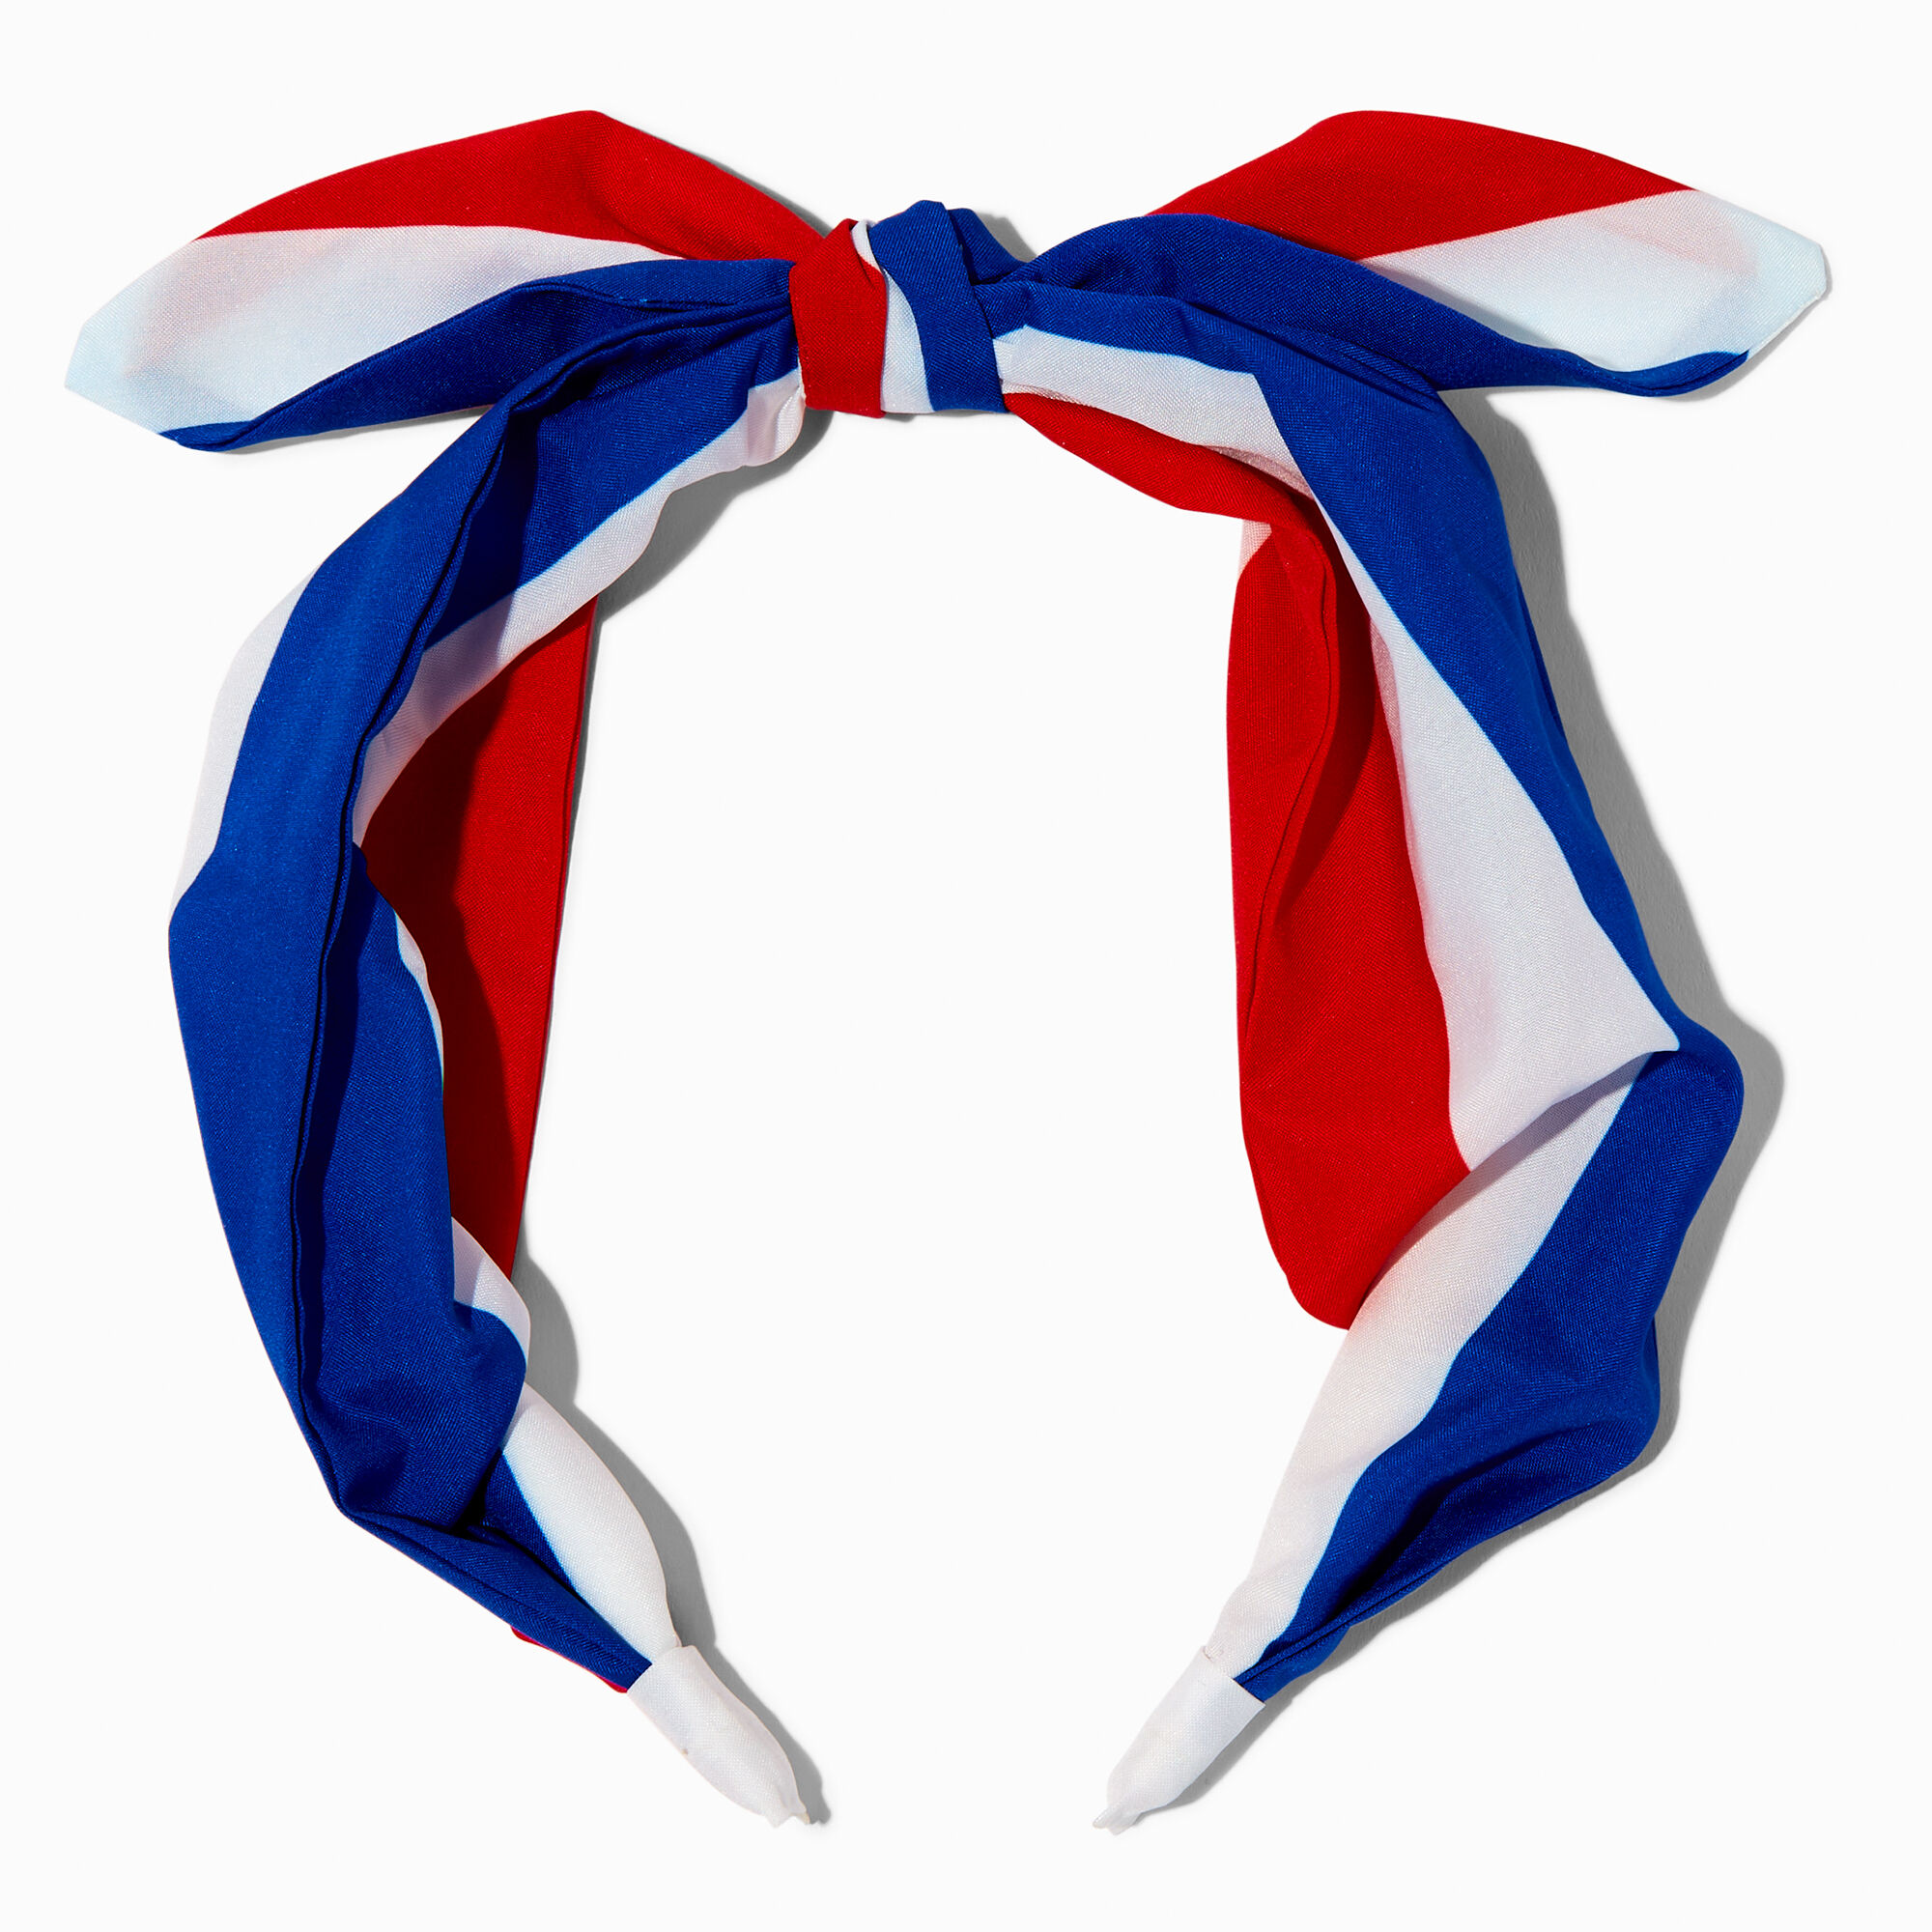 View Claires Red White Knotted Bow Headband Blue information